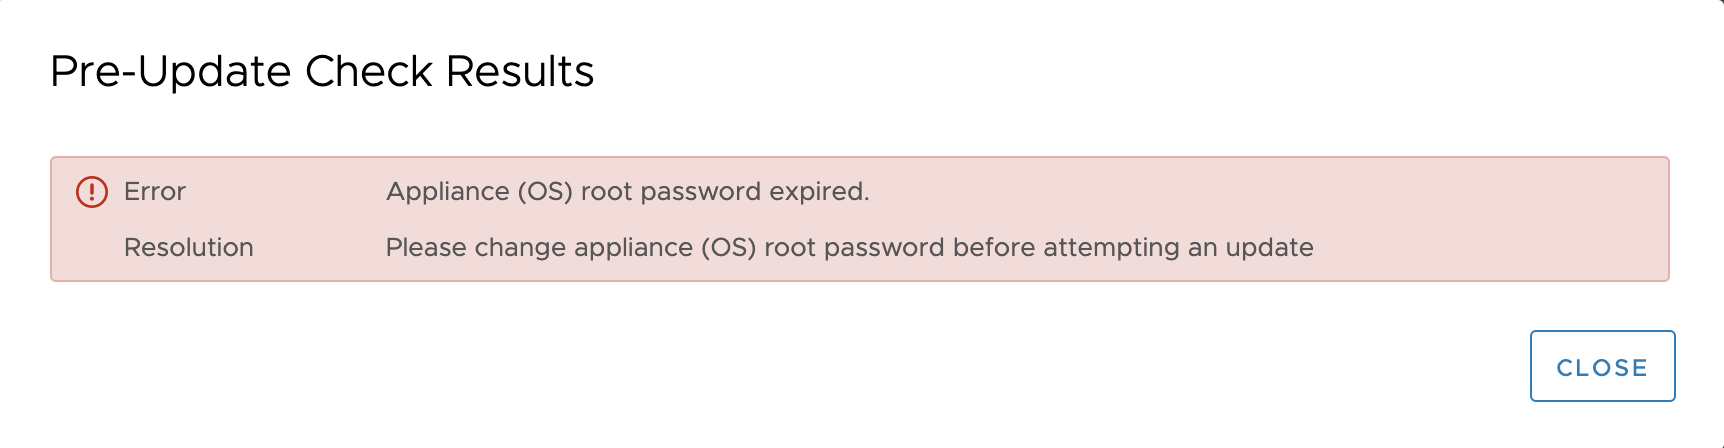 appliance-os-root-password-expired-vdives